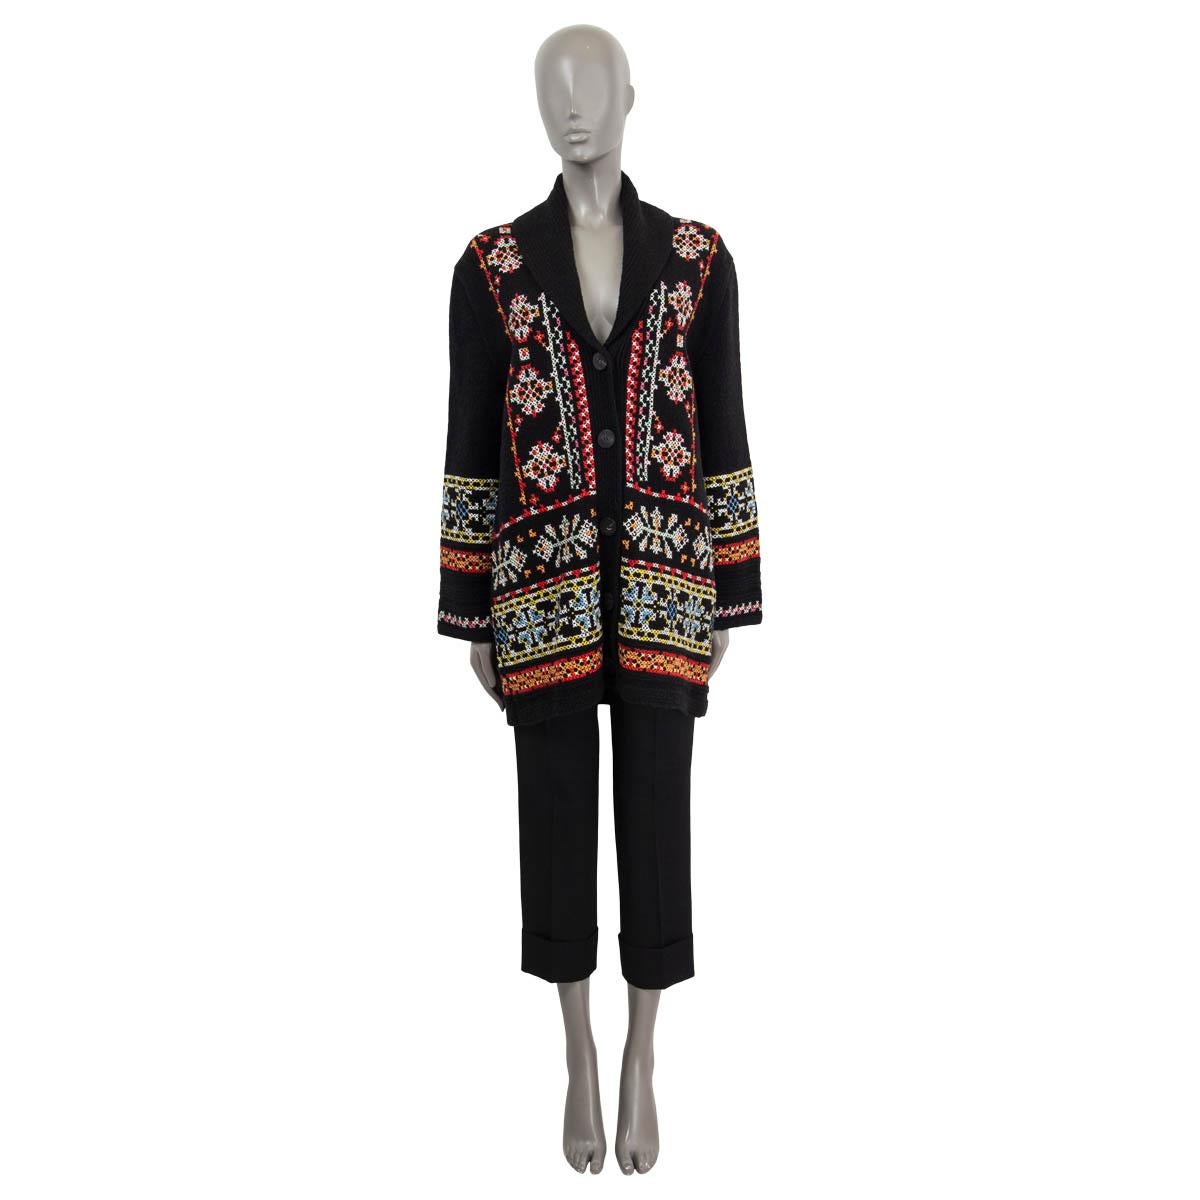 100% authentic Christian Dior Pre-Fall 2019 embroidered long knit cardigan in black, red, yellow, white, pastel pink and orange wool (78%) and cashmere (22%). Opens with five buttons on the front. Unlined. Has been worn and is in excellent